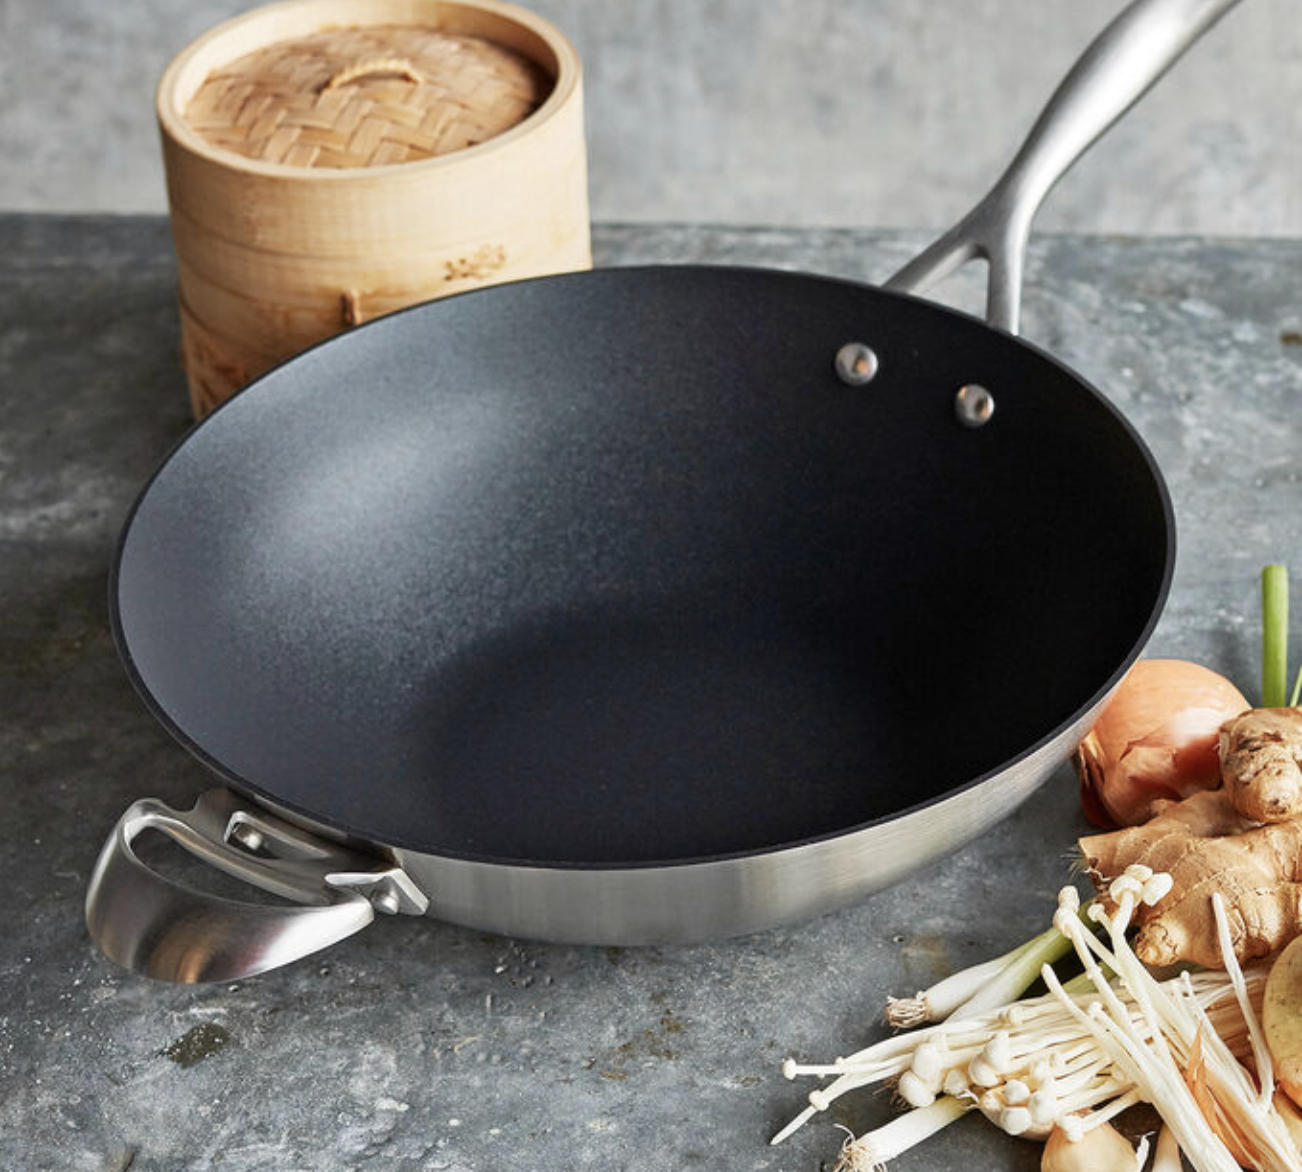 These 4 high-end cookware sets are up to $585 off at Sur La Table